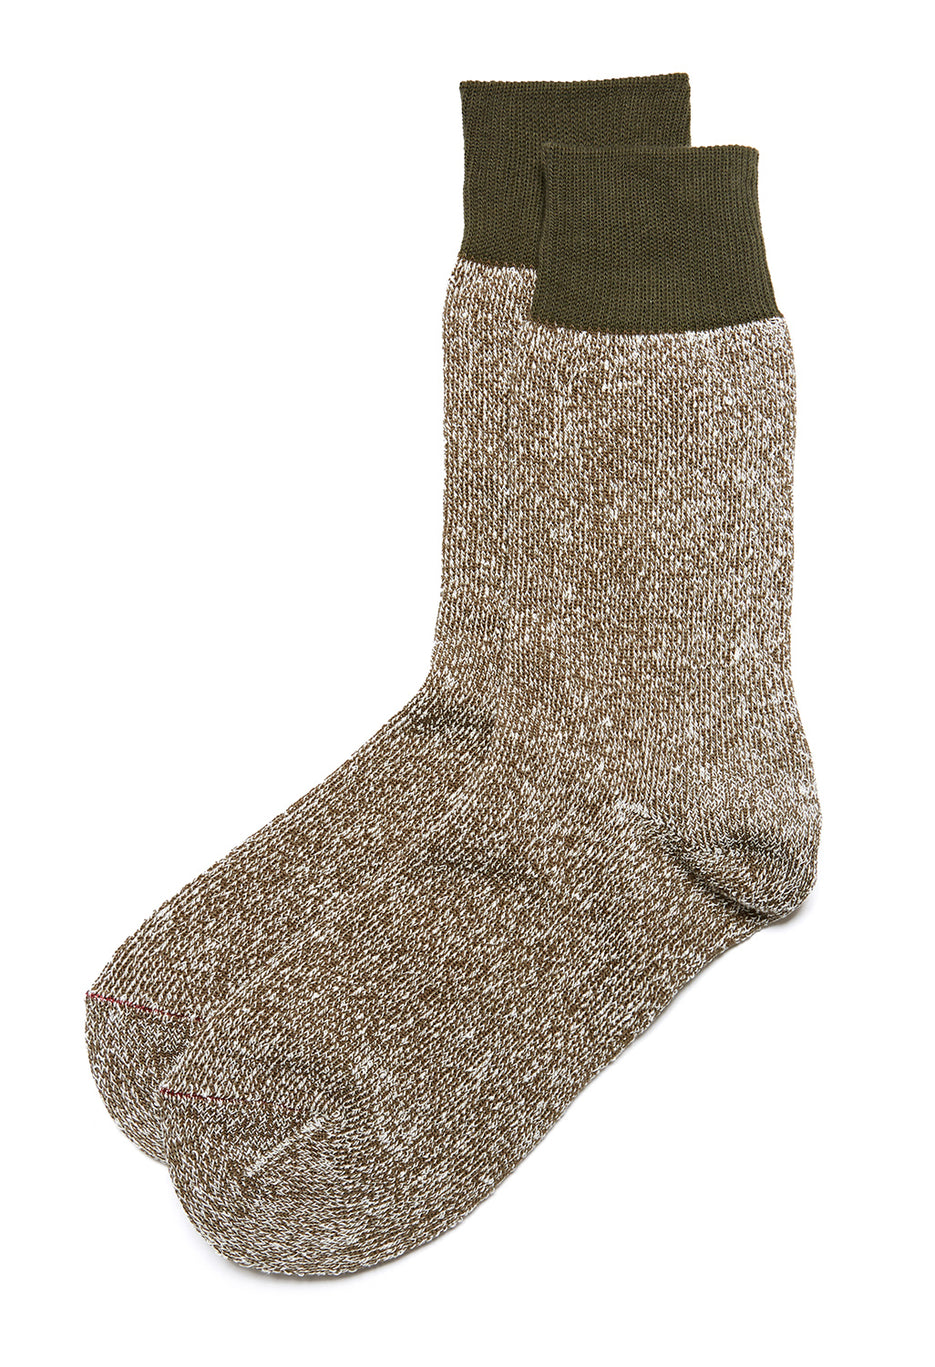 ROTOTO Double Face Silk and Cotton Socks 5